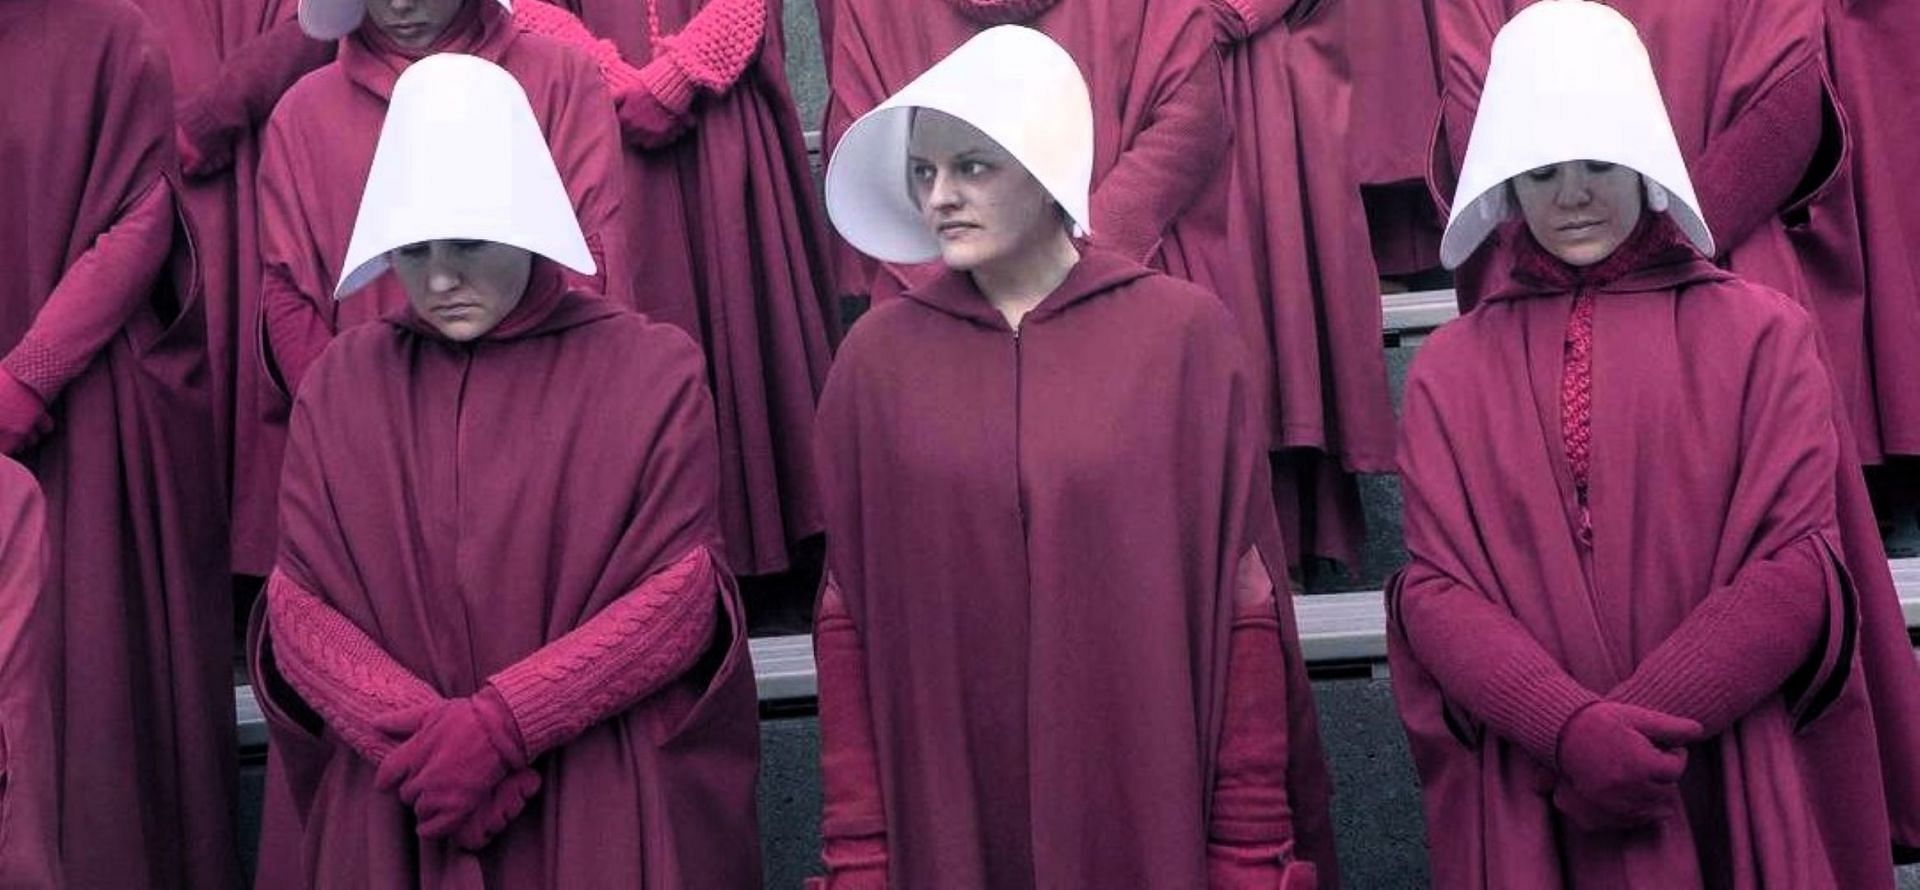 With the help of others around her June managed to escape Gilead (Image via Instagram/handmaidsonhulu)